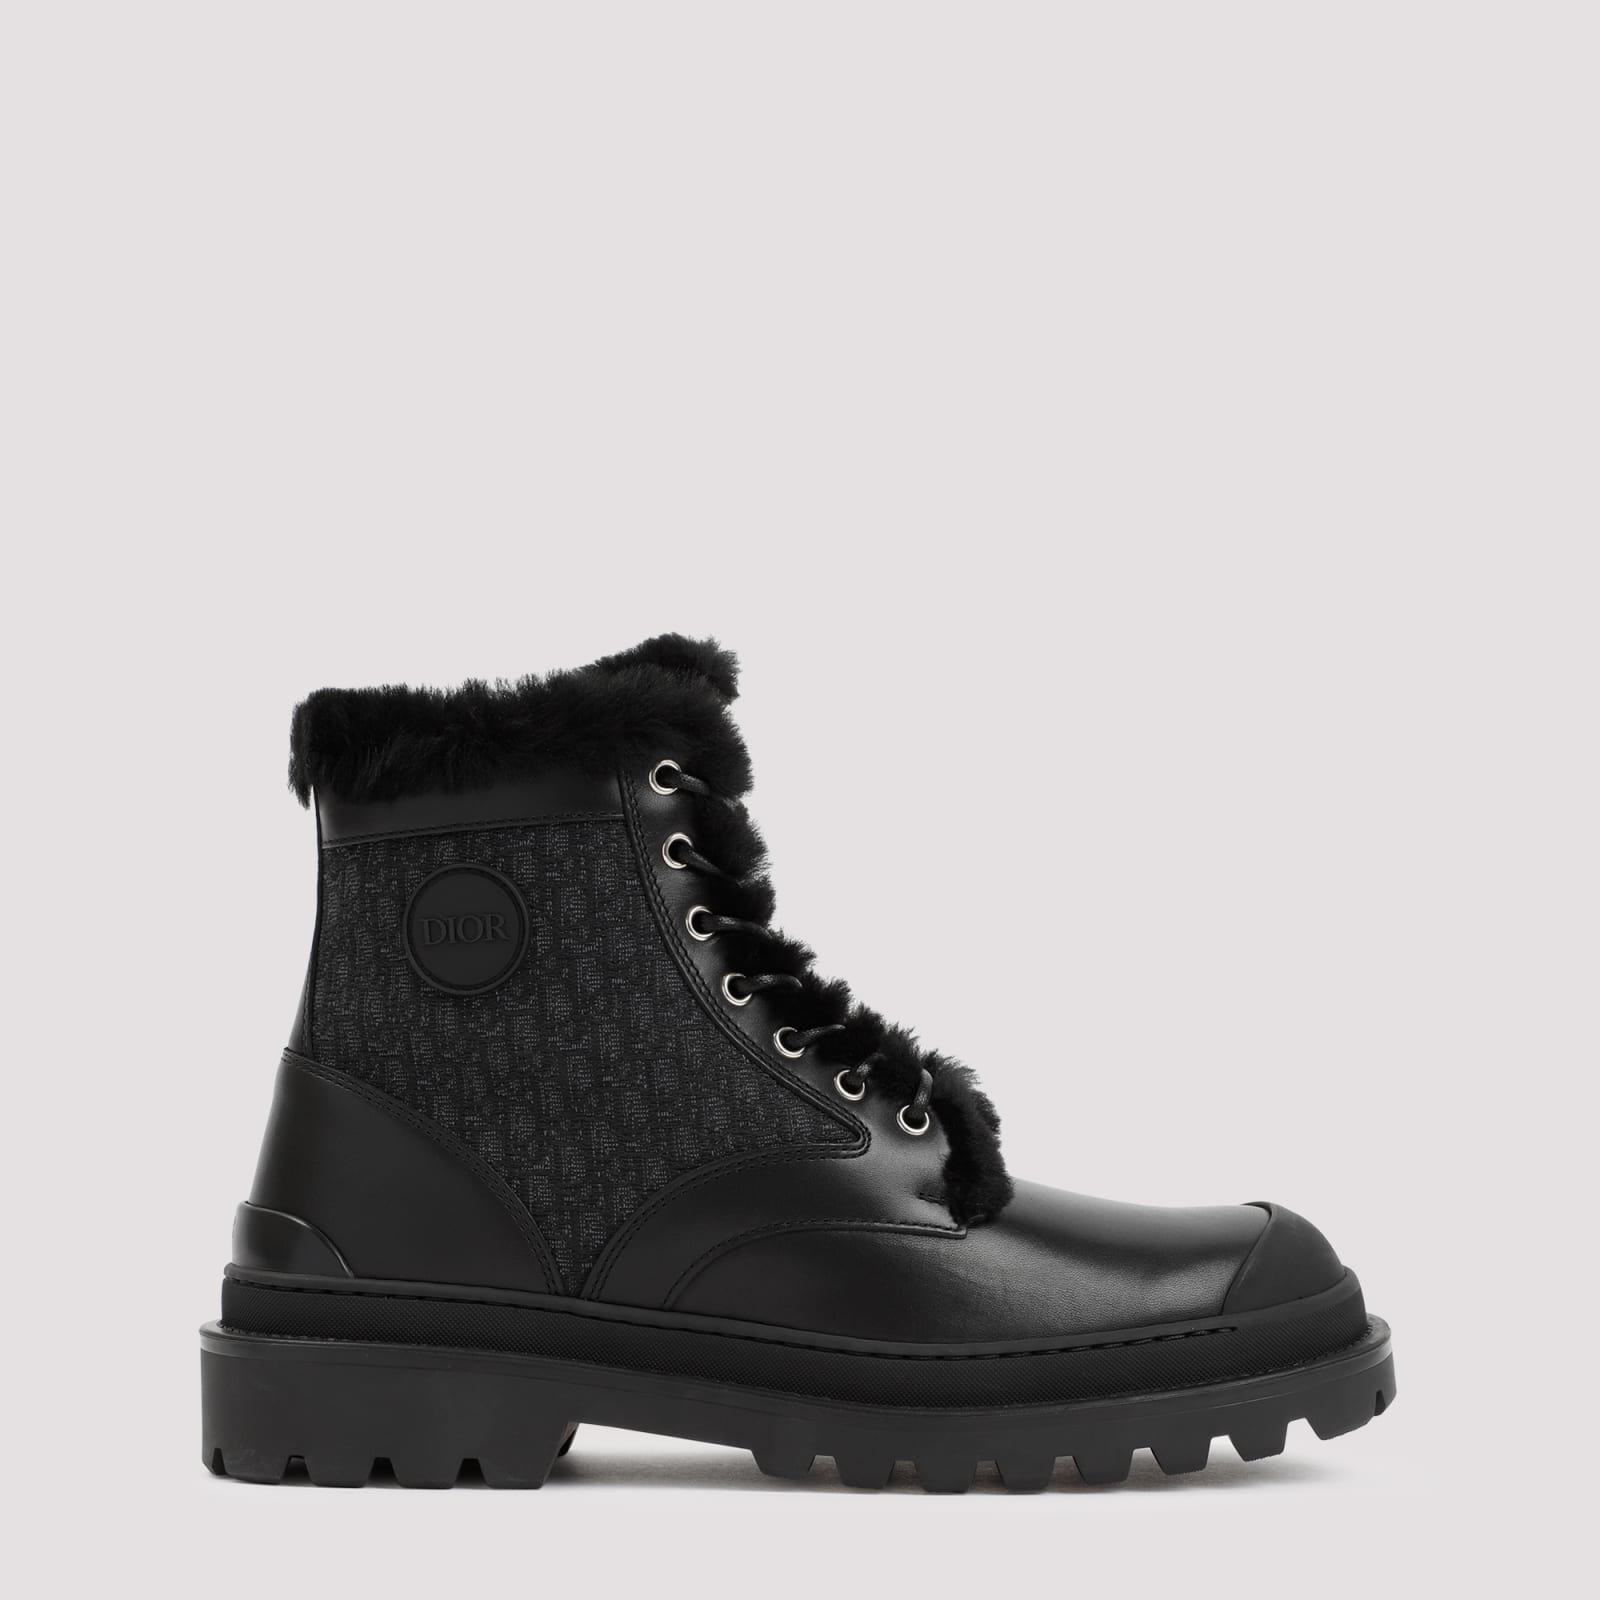 Dior Homme Boot